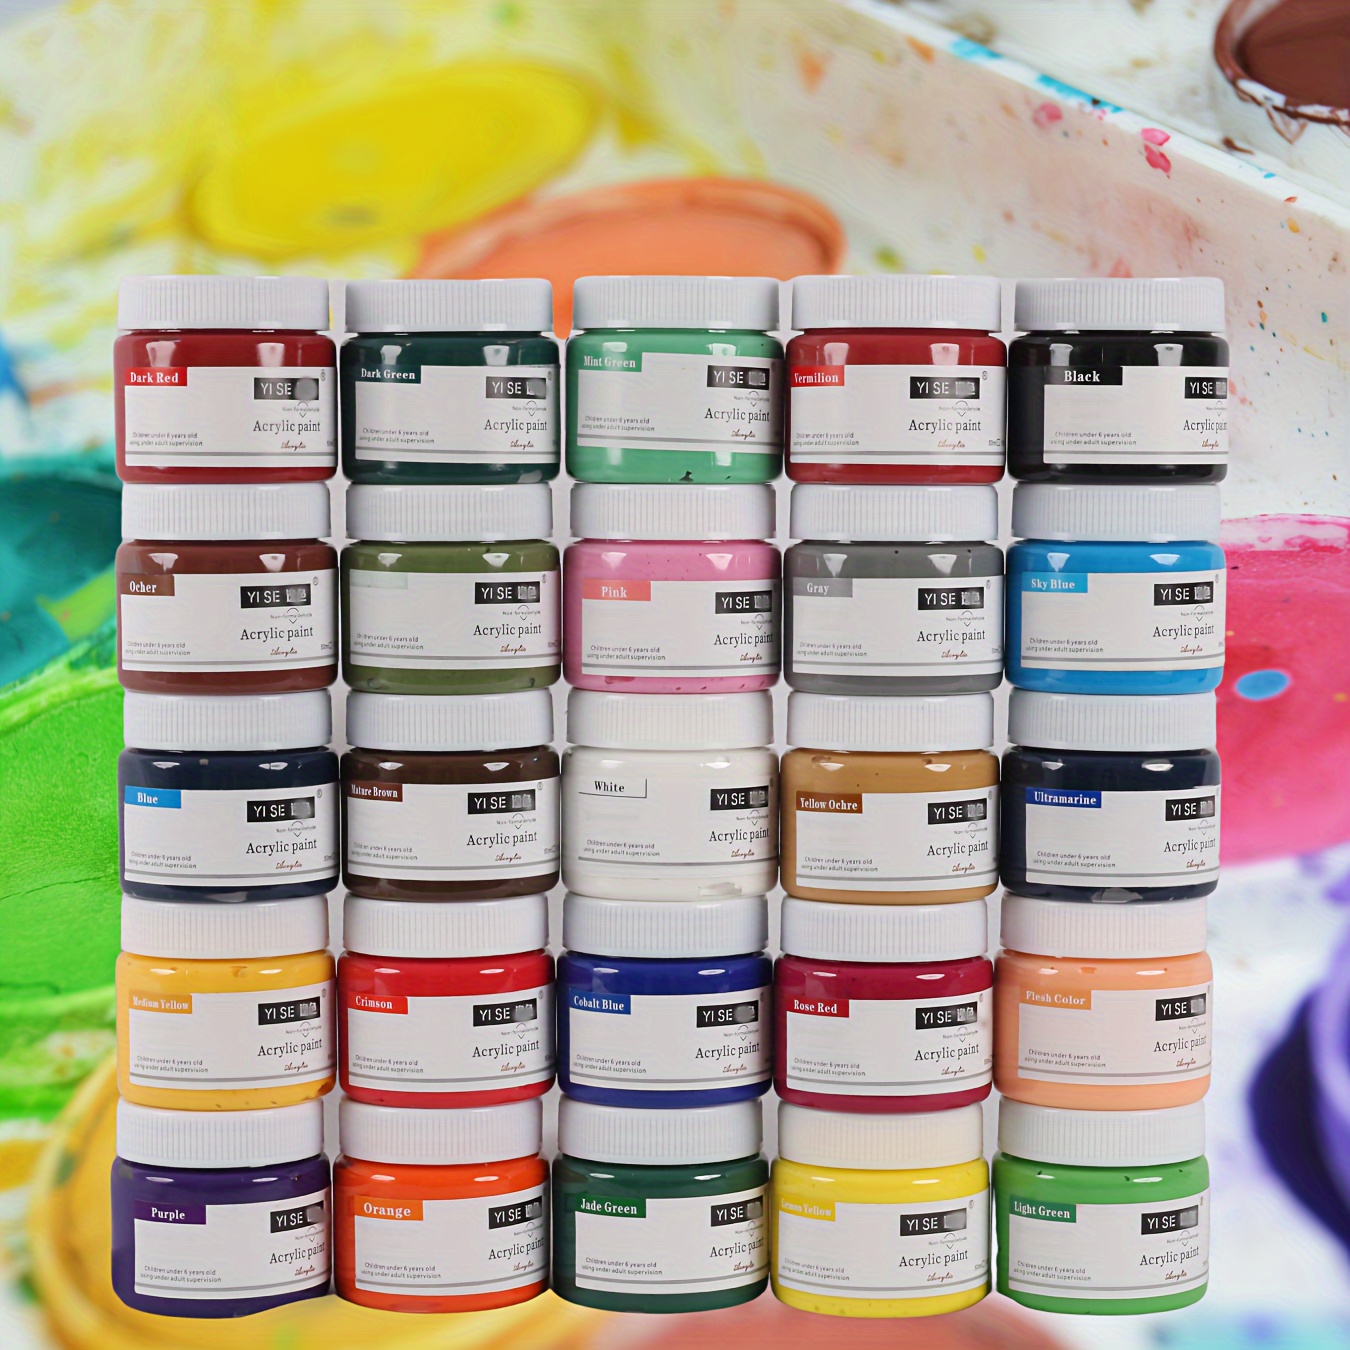 Different Types of Craft Paint